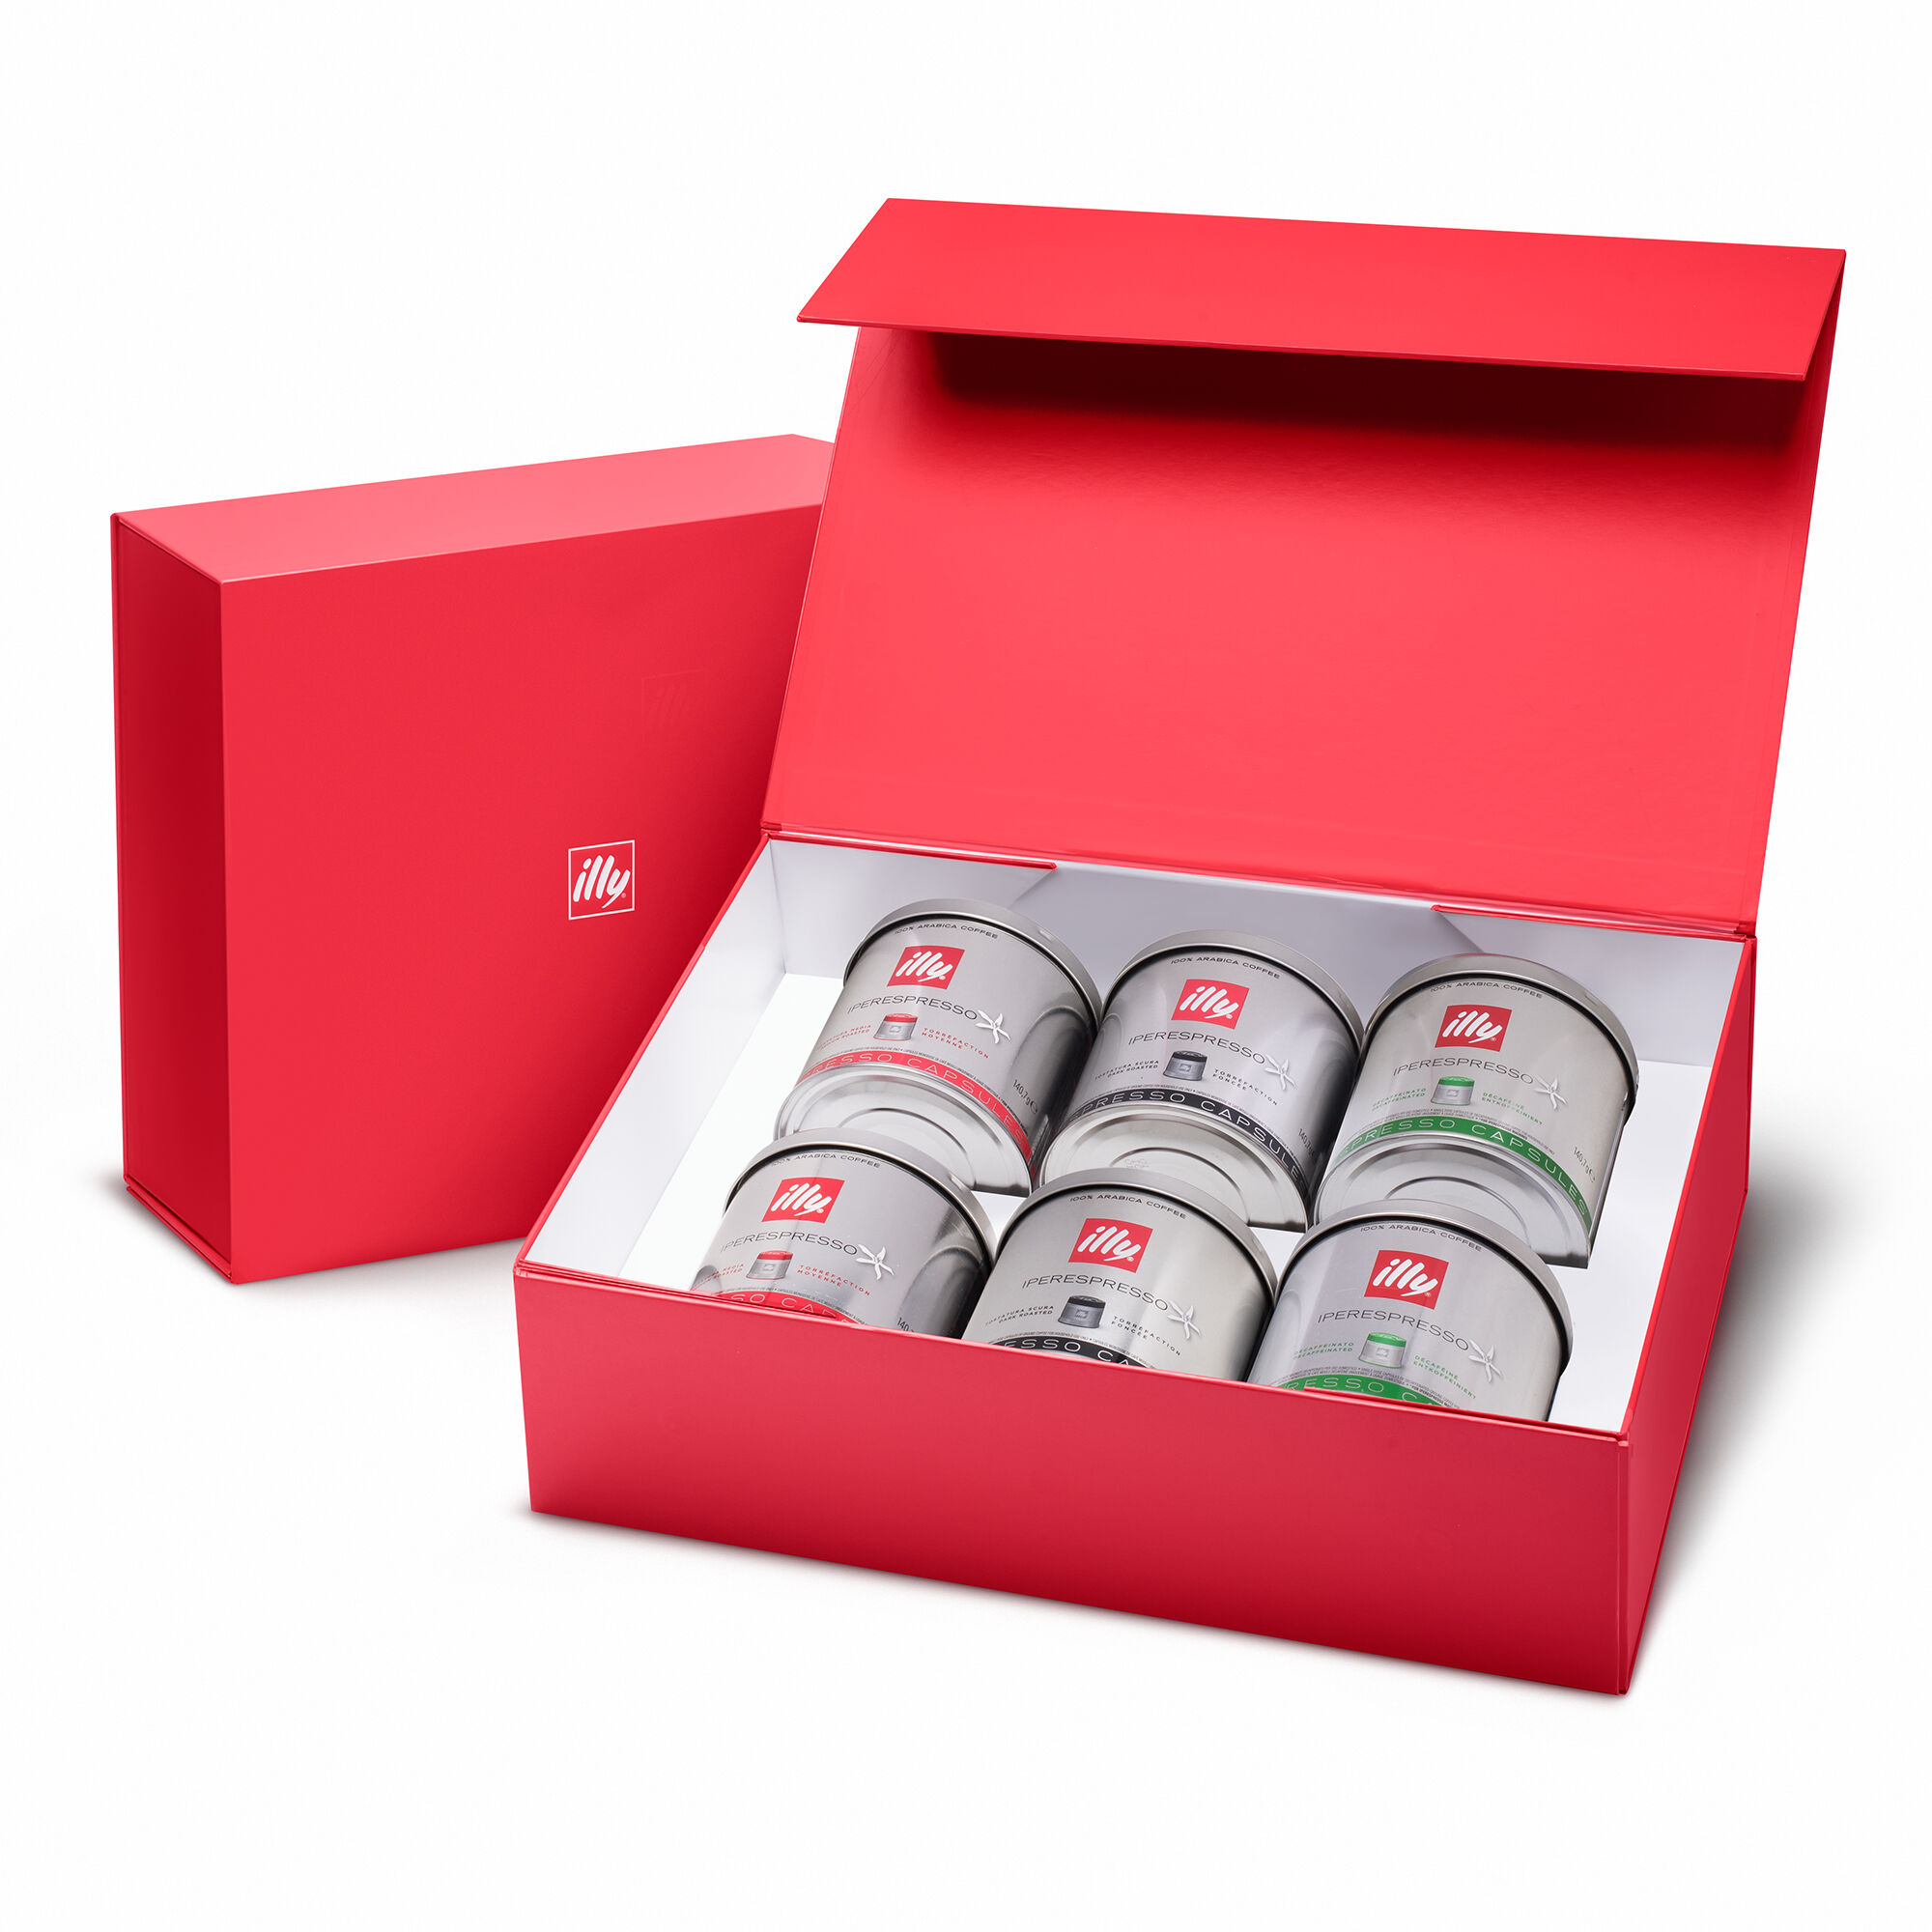 Customize a Gift Box of 6 illy Cans of Iperespresso Coffee